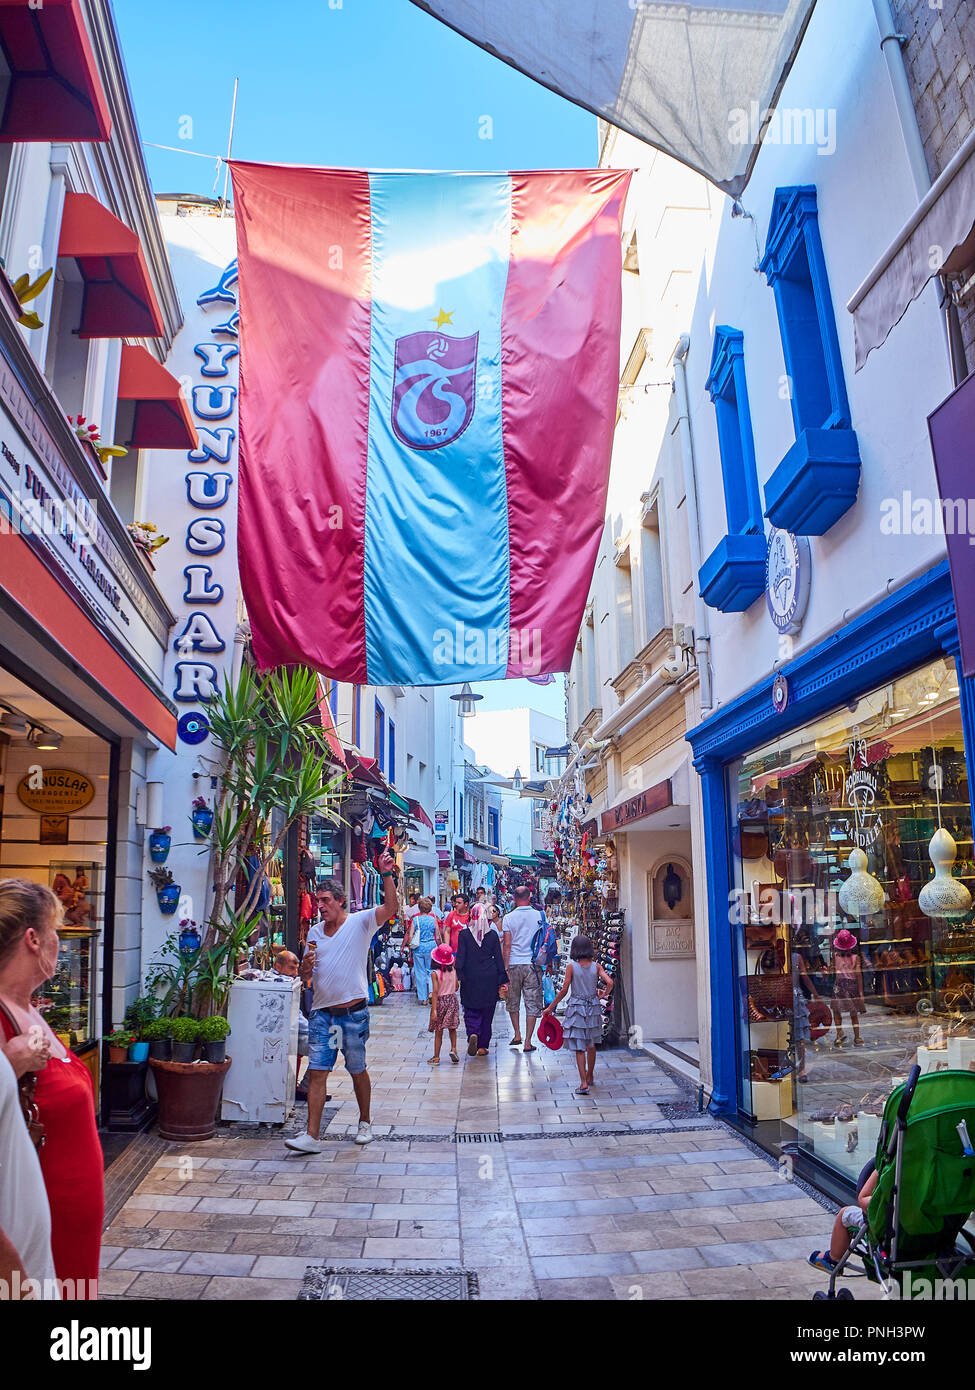 Bodrum, Turkey - July 5, 2018. A man pointing to the flag of Turkish football club Trabzonspor in a street of Bodrum downtown. Mugla Province, Turkey. Stock Photo